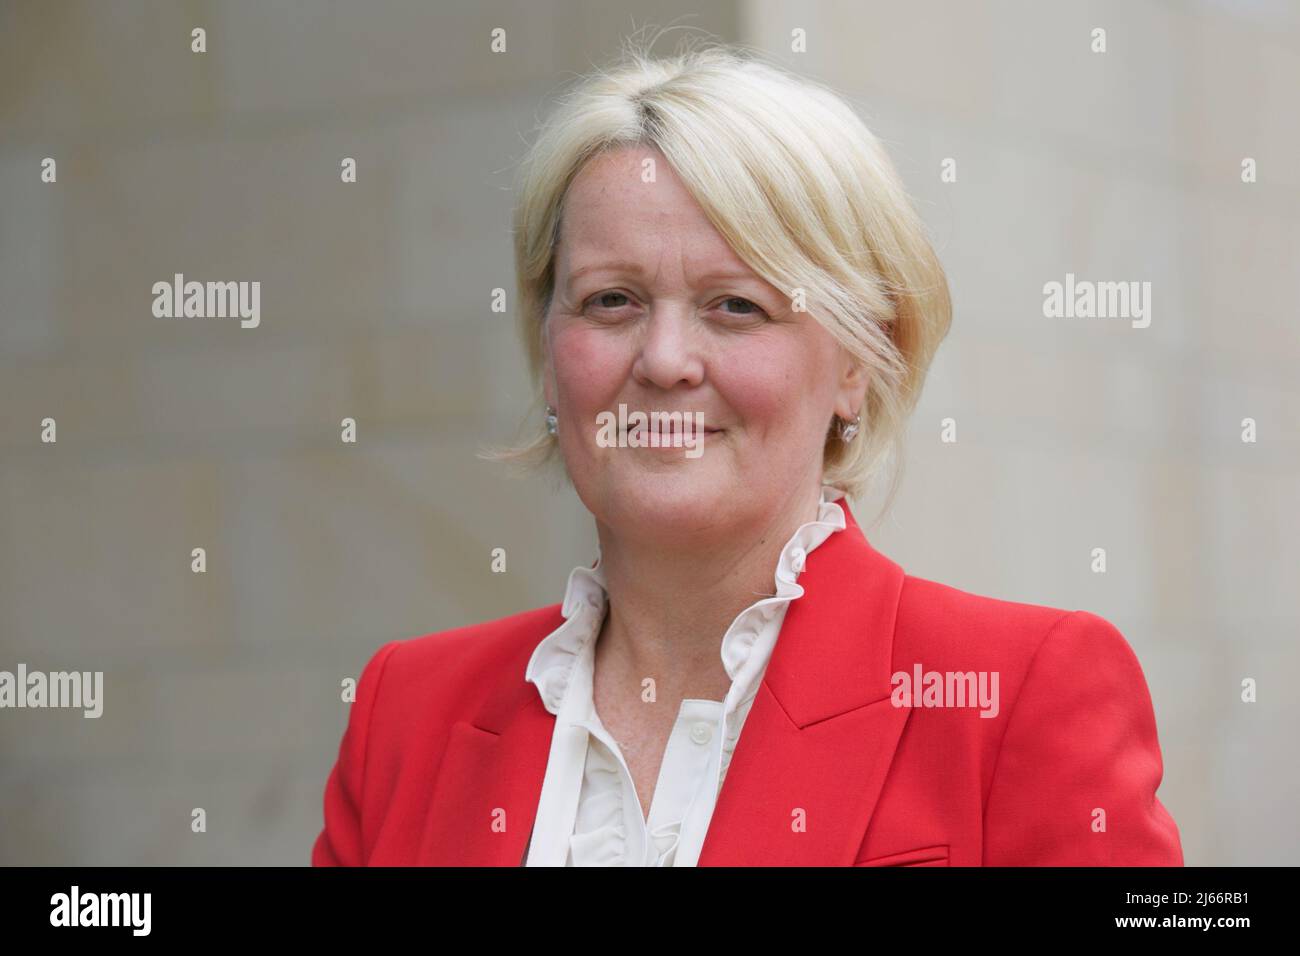 Edinburgh, UK, 28th April 2022: Alison Rose, chief executive of NatWest Group, attending the AGM of the company at its Gogarburn headquarters. Pic: TERRY MURDEN / Alamy Stock Photo